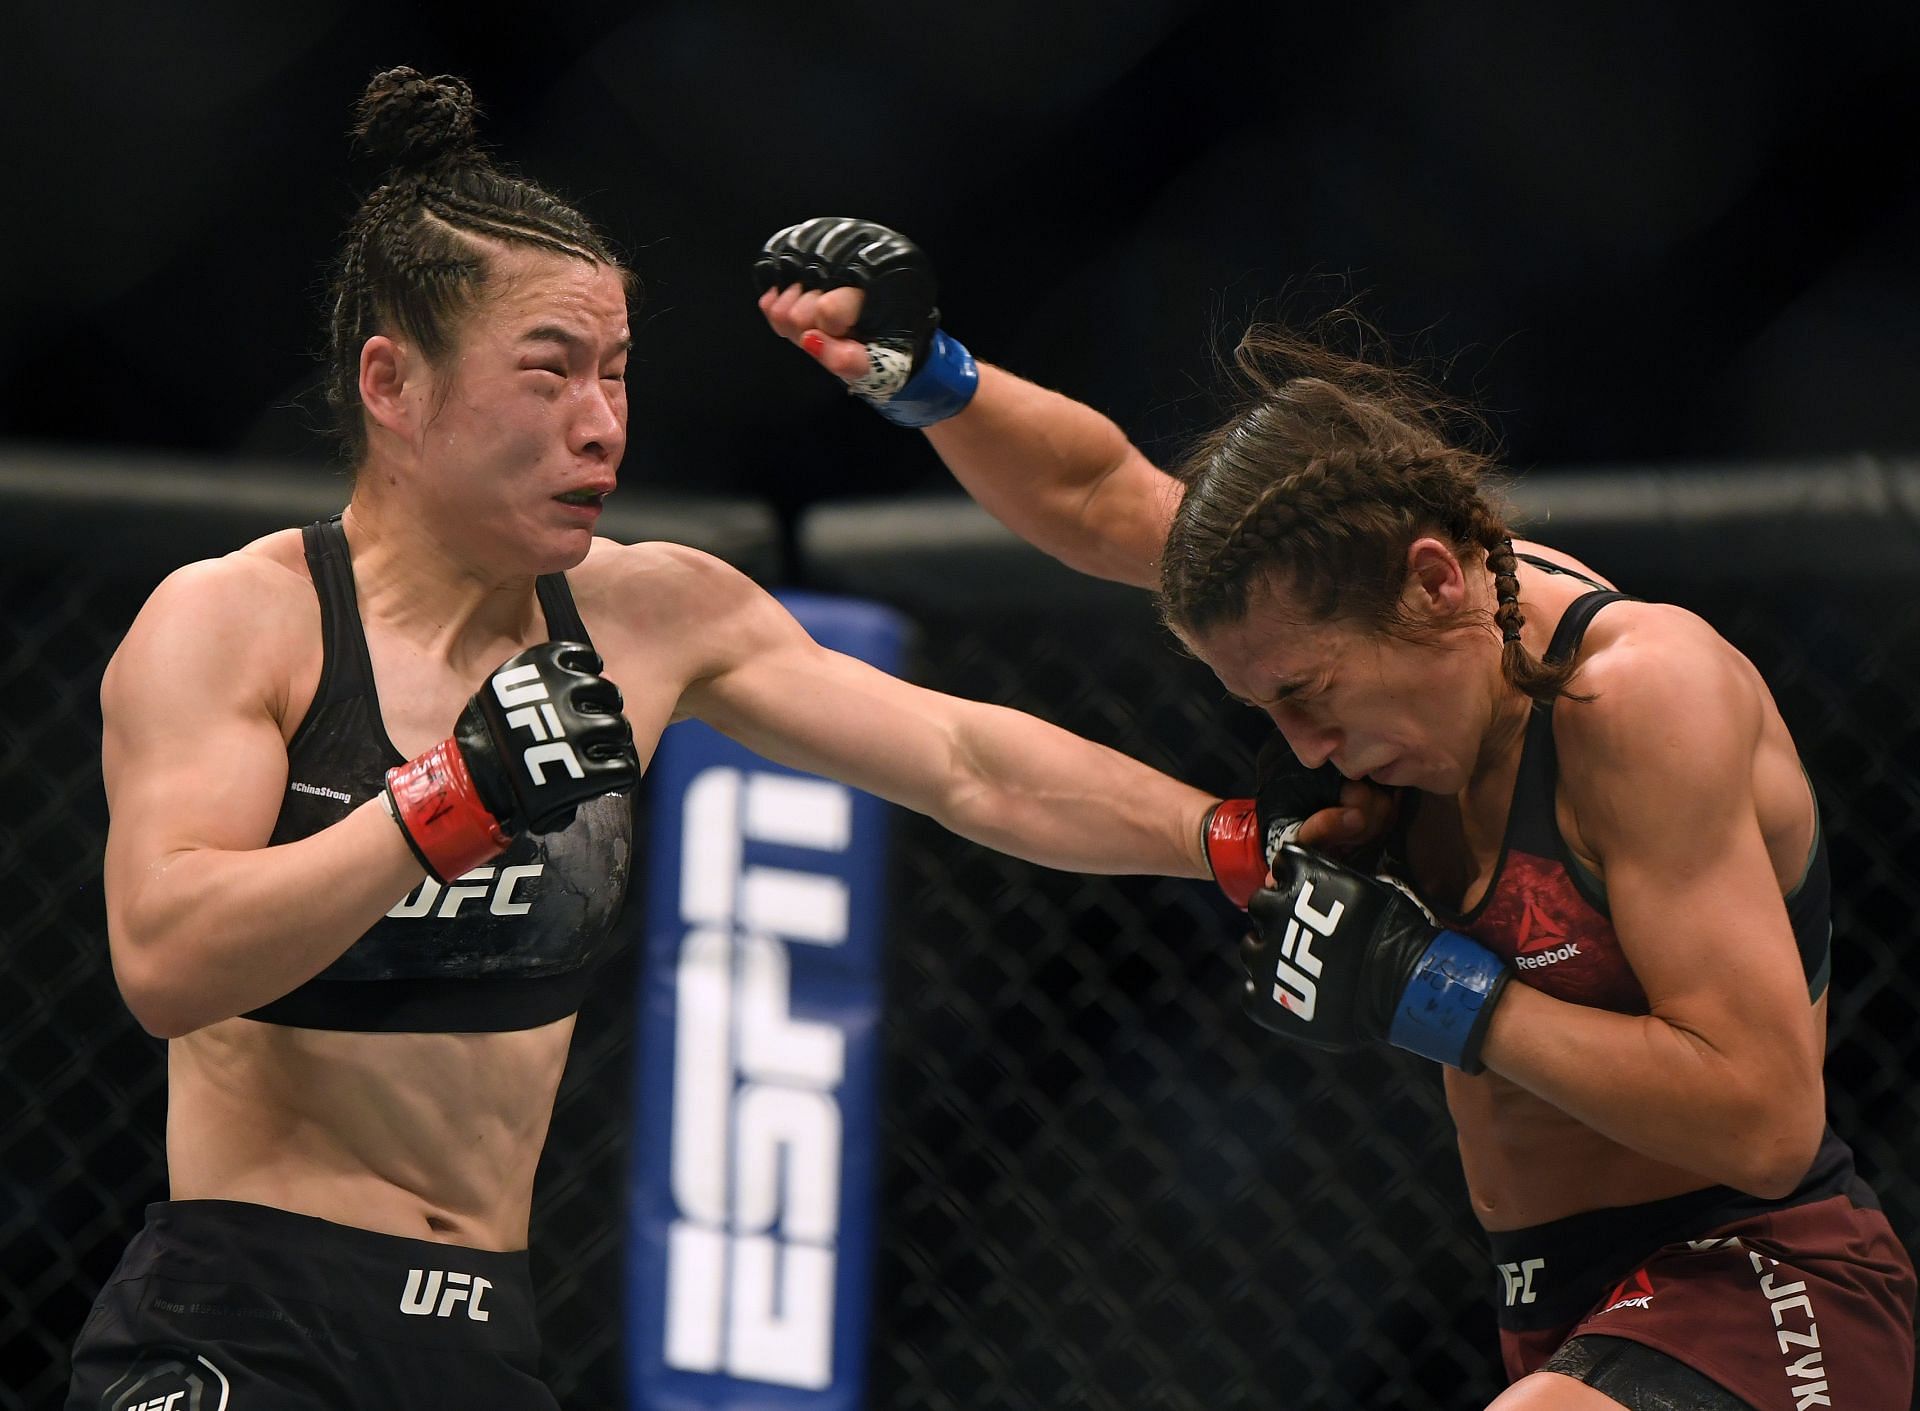 Zhang Weili (left) and Joanna Jedrzejczyk (right) gave us a war at UFC 248